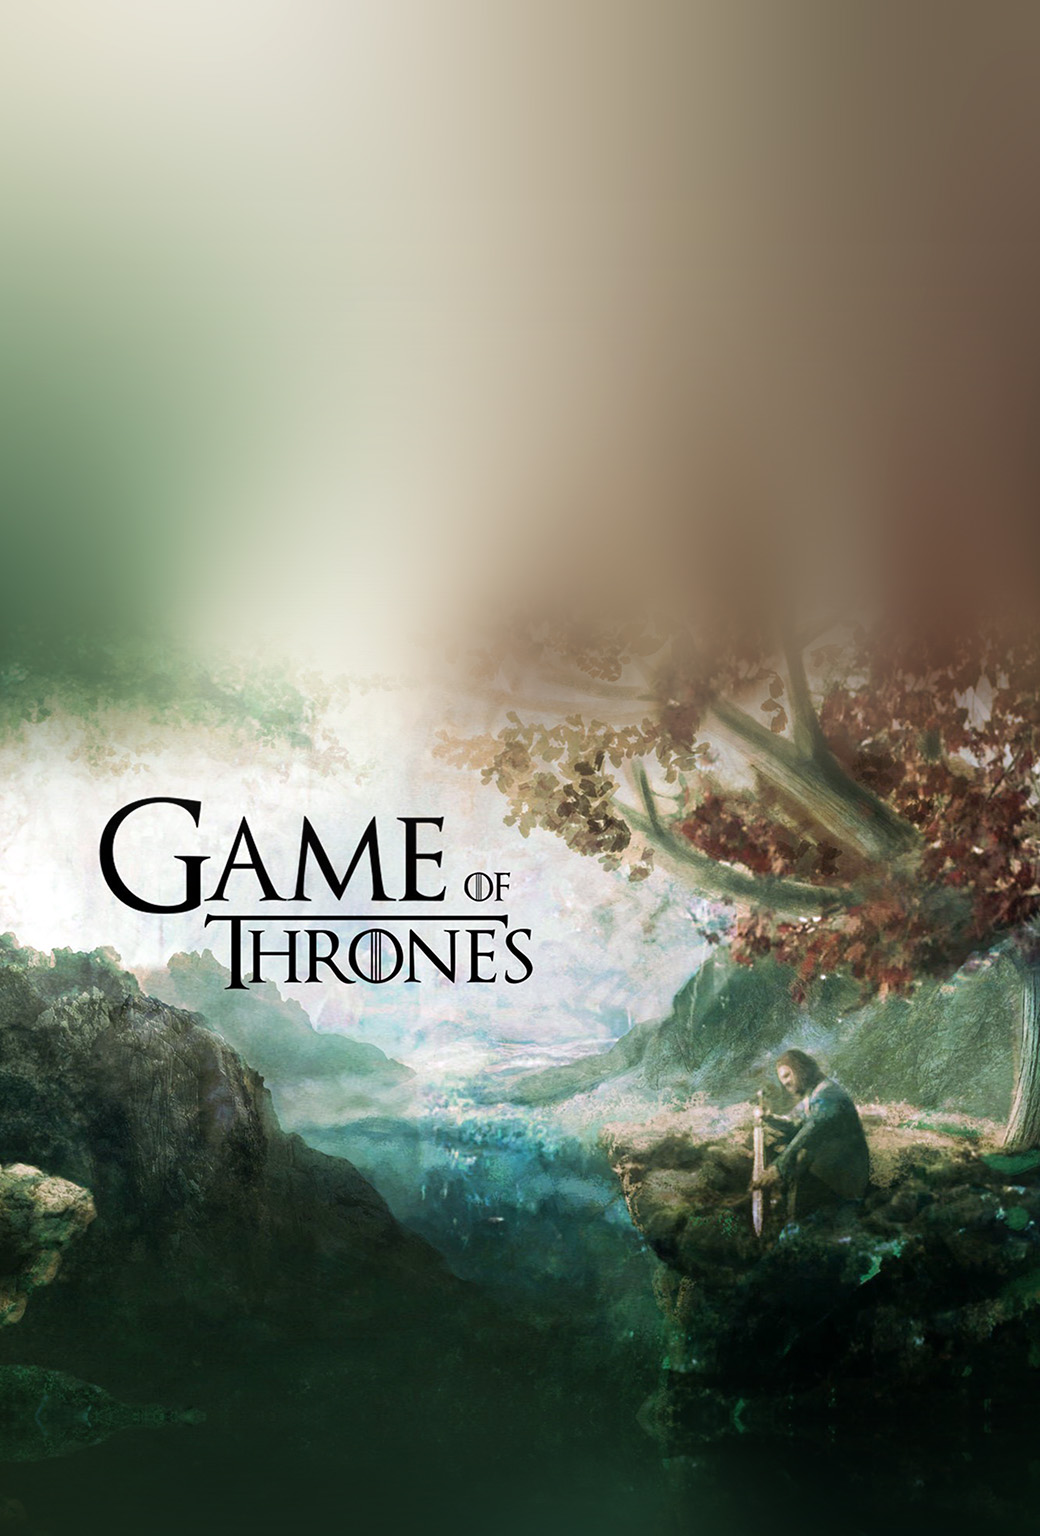 Game of Thrones wallpapers for iPhone and iPad 1040x1536